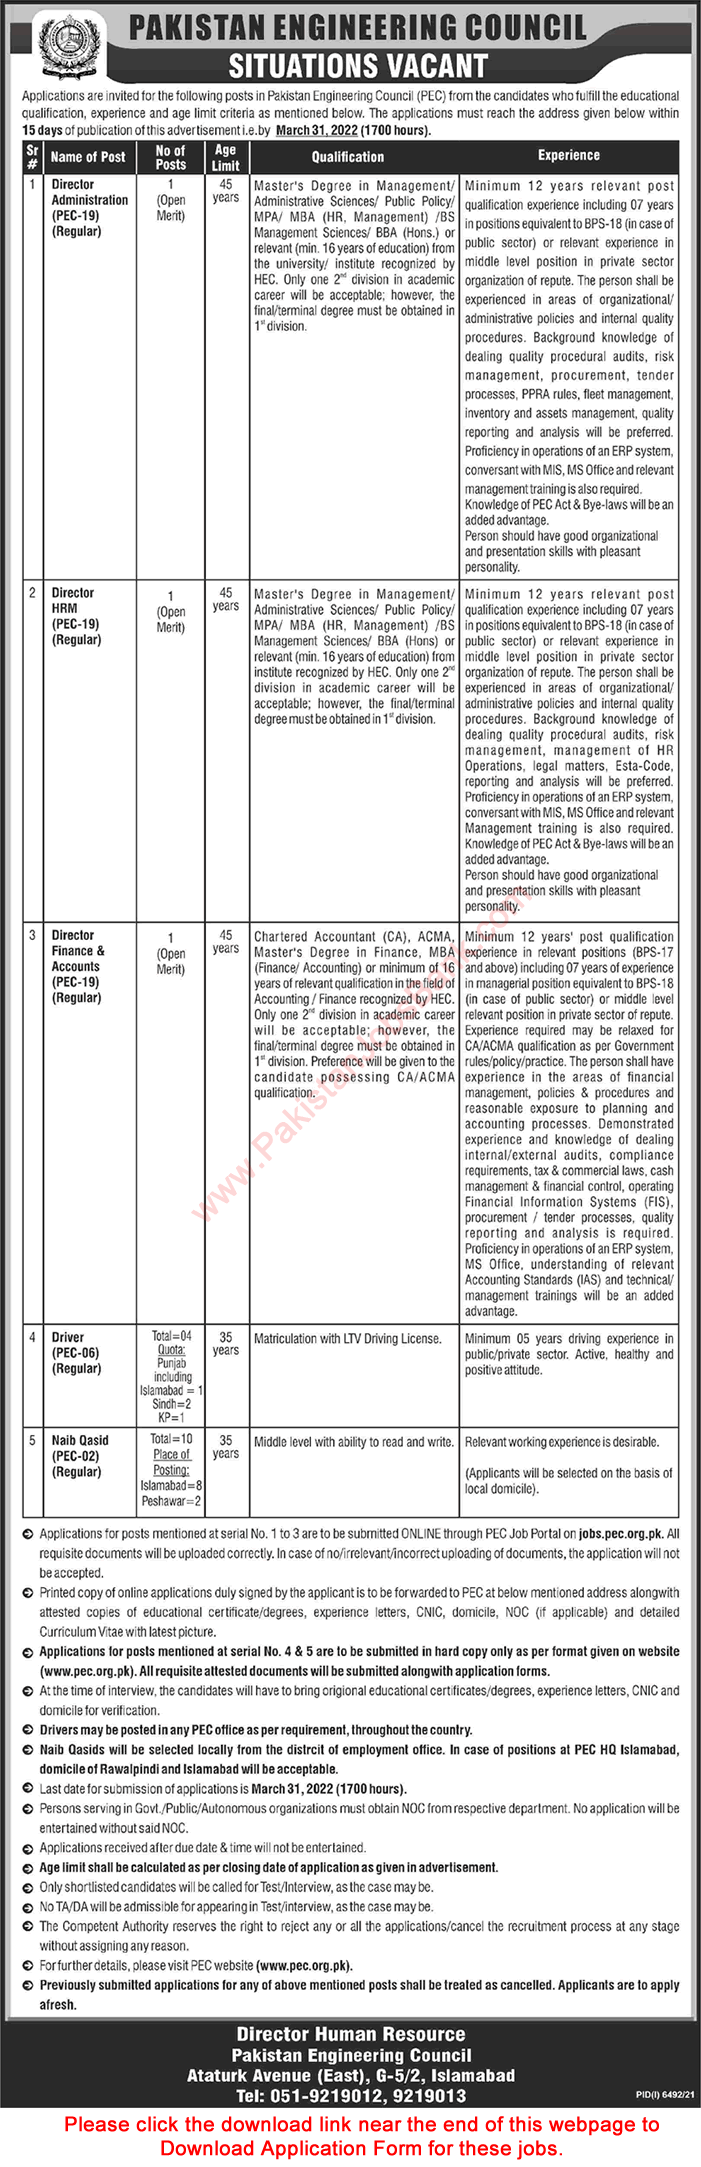 Pakistan Engineering Council Jobs March 2022 PEC Application Form Naib Qasid, Drivers & Others Latest